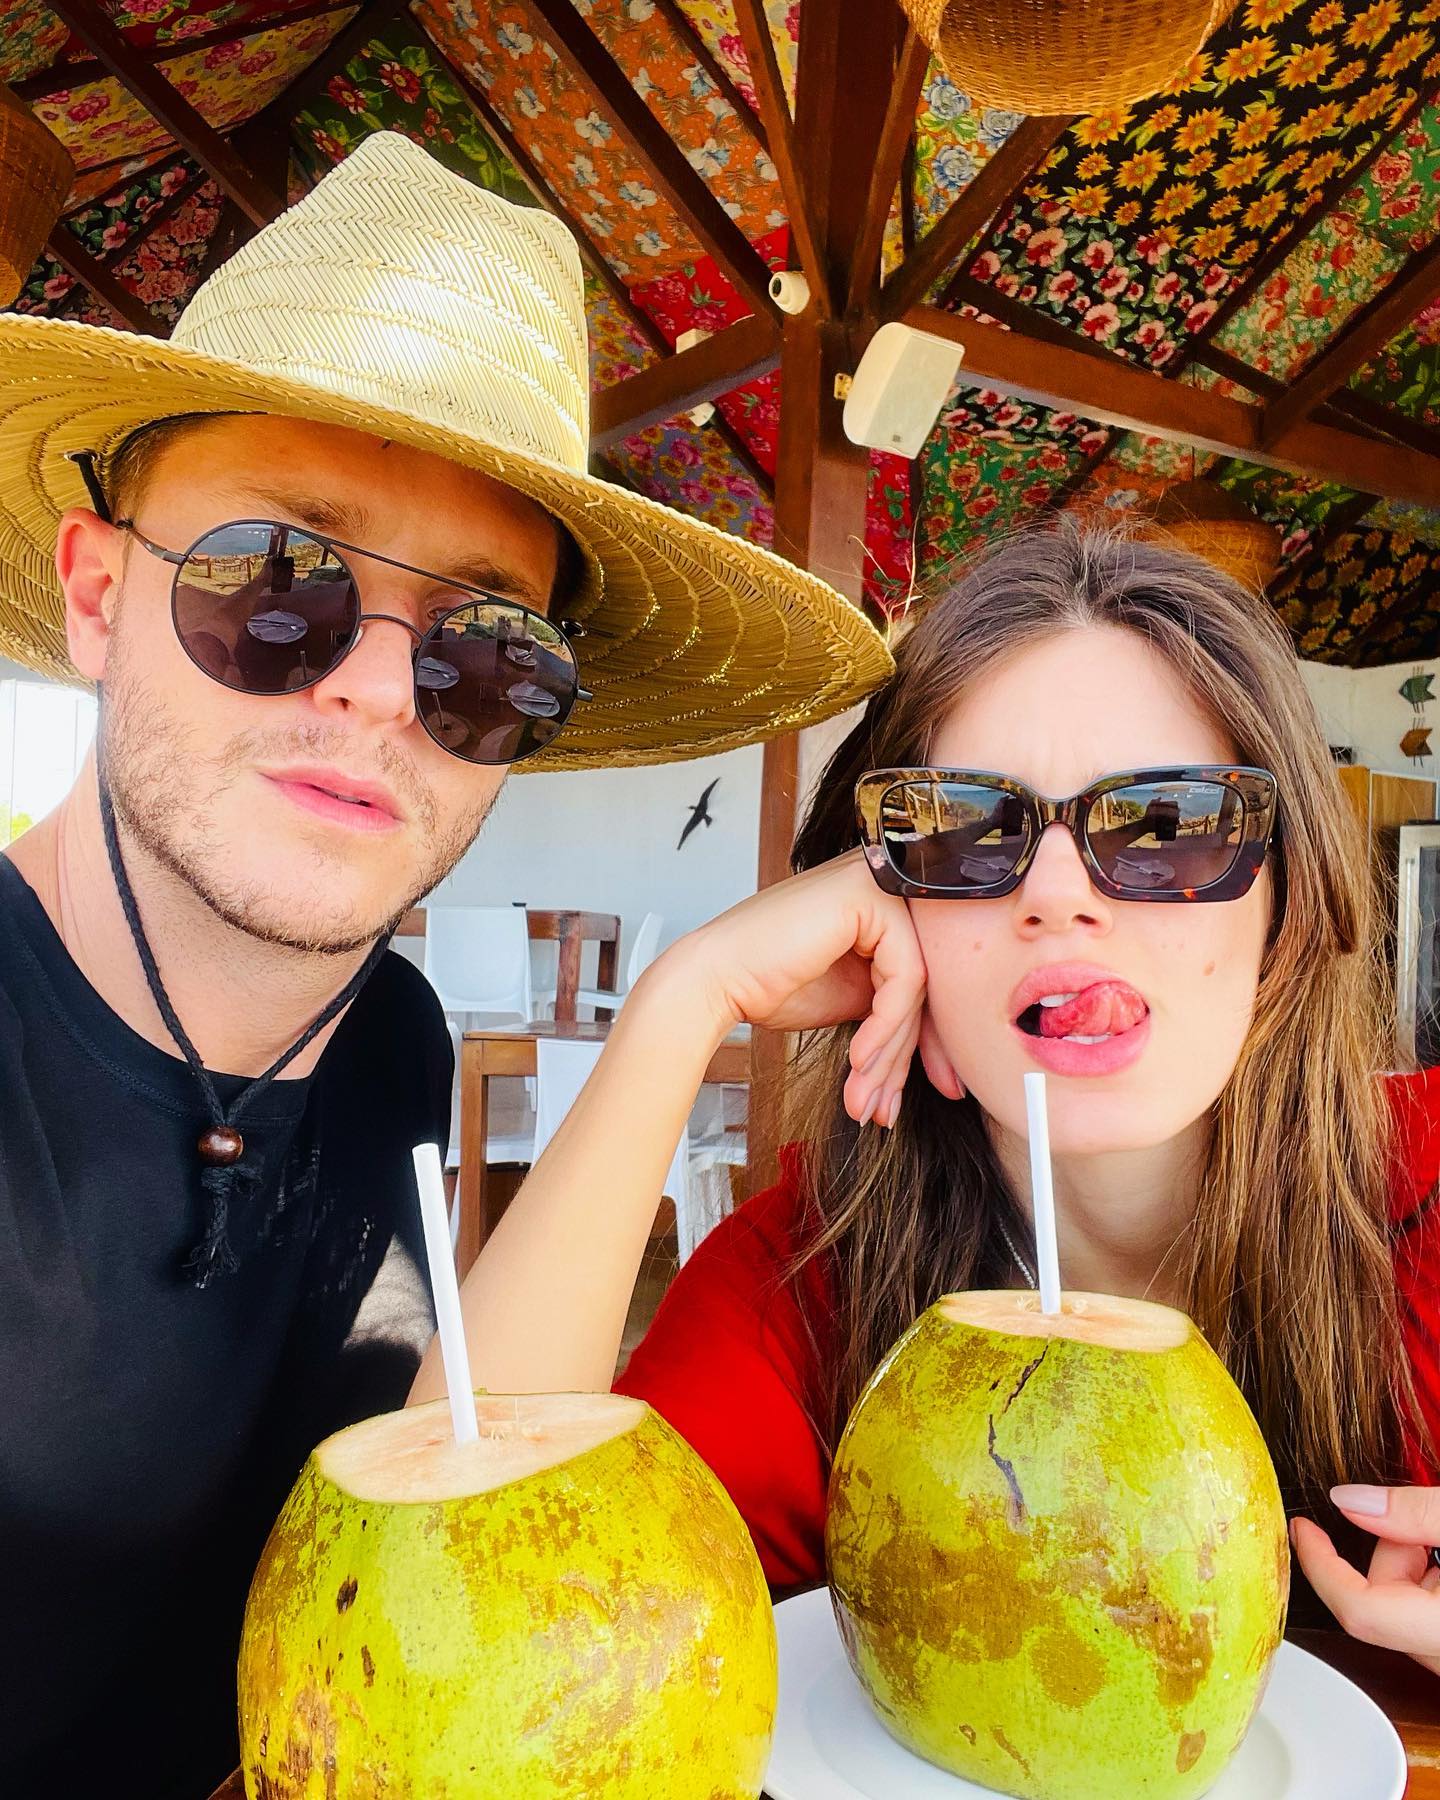 https://e.radikal.host/2023/04/20/Photo-shared-by-Klebber-Toledo-on-April-14-2023-tagging-camilaqueiroz.-May-be-an-image-of-2-people-and-coconut..jpg